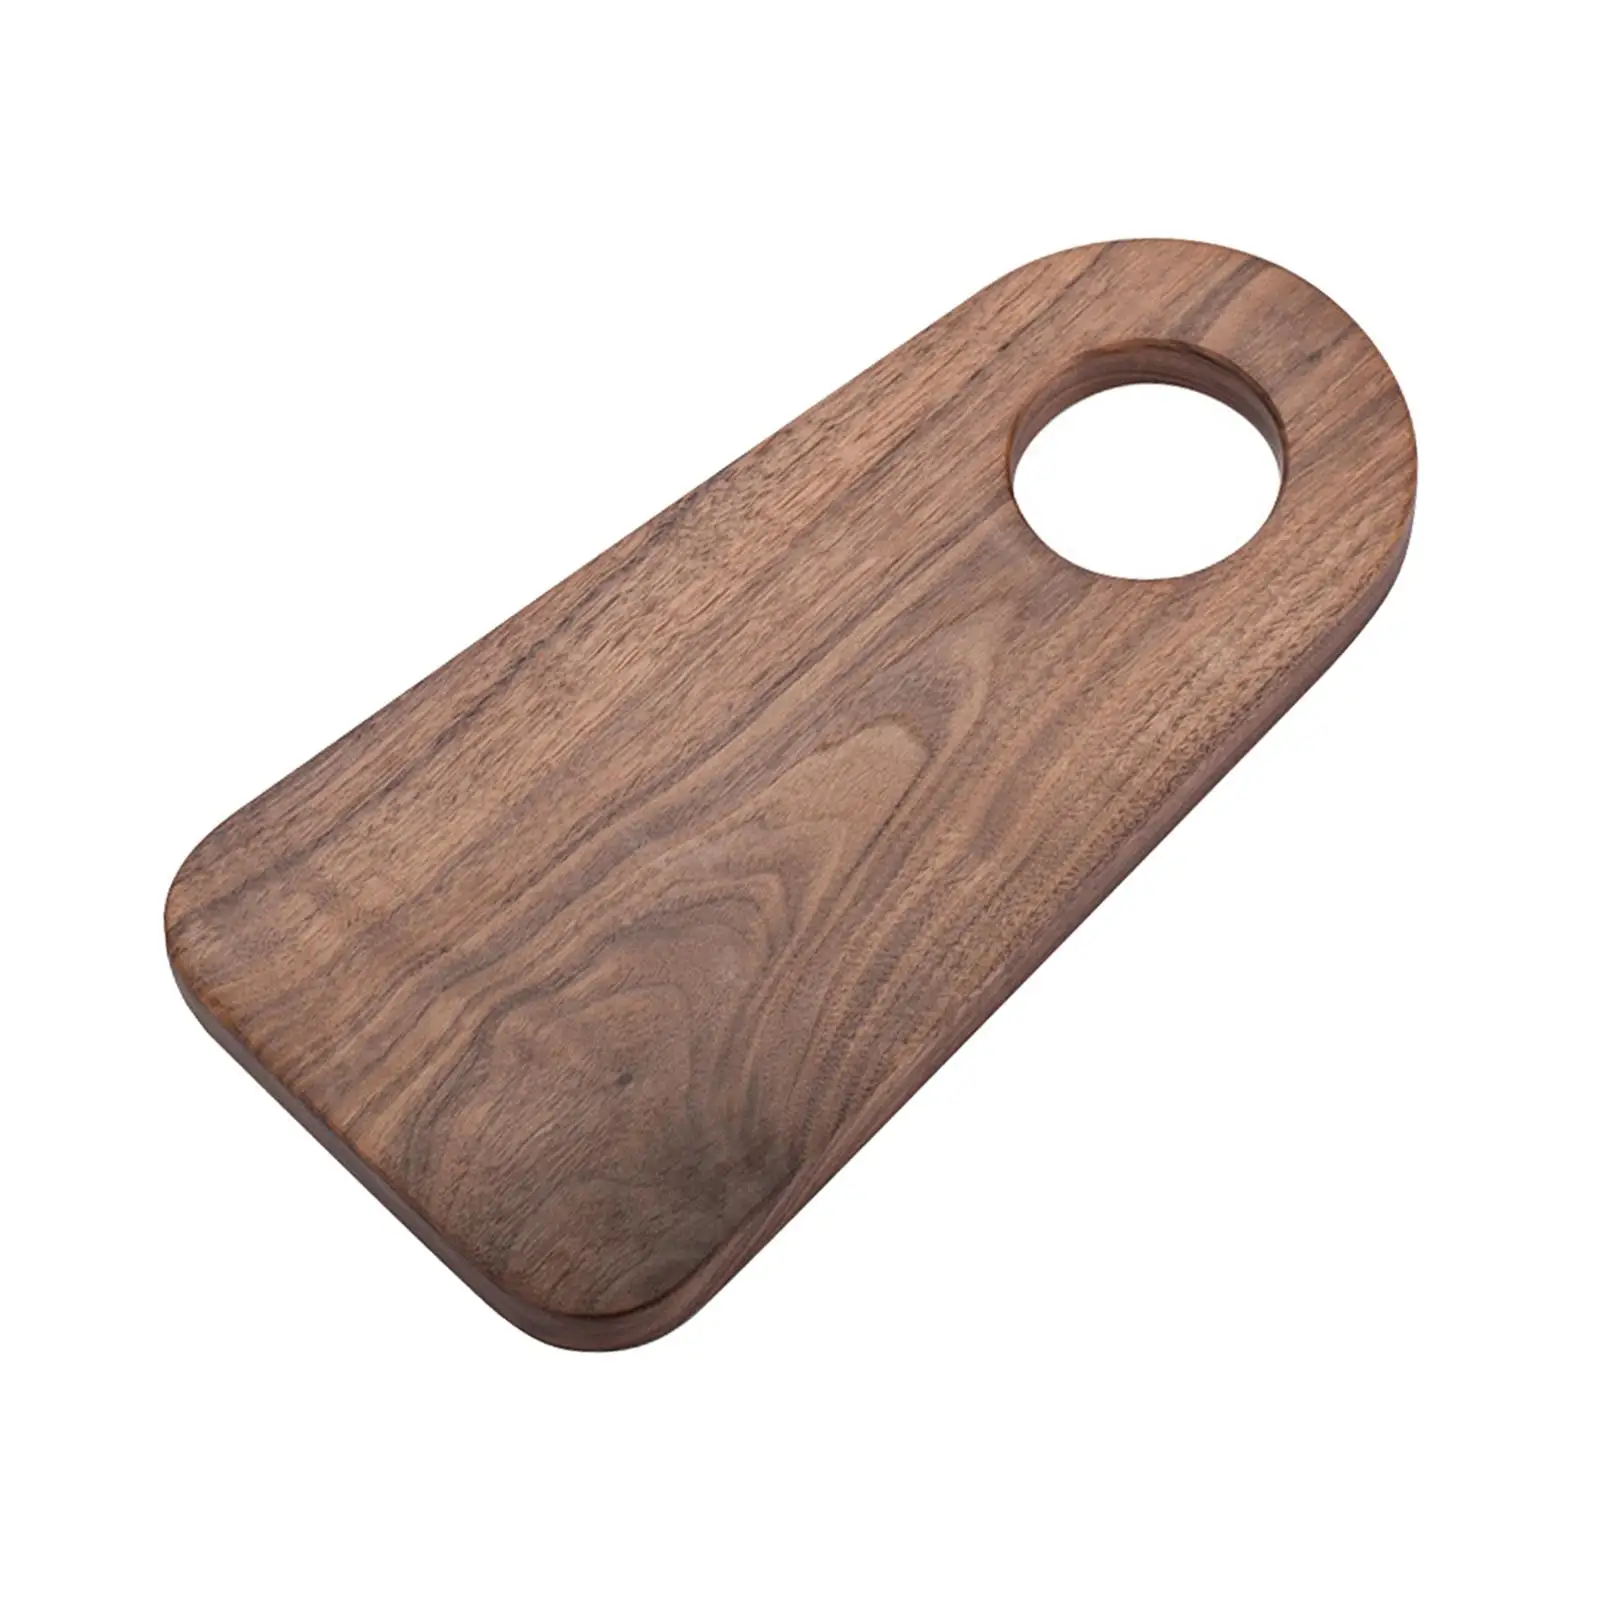 Wood Cutting Board,Pizza Board Food Serving Tray,Bread Tray Utensils Chopping Board for Vegetables Bread Steak Fruits